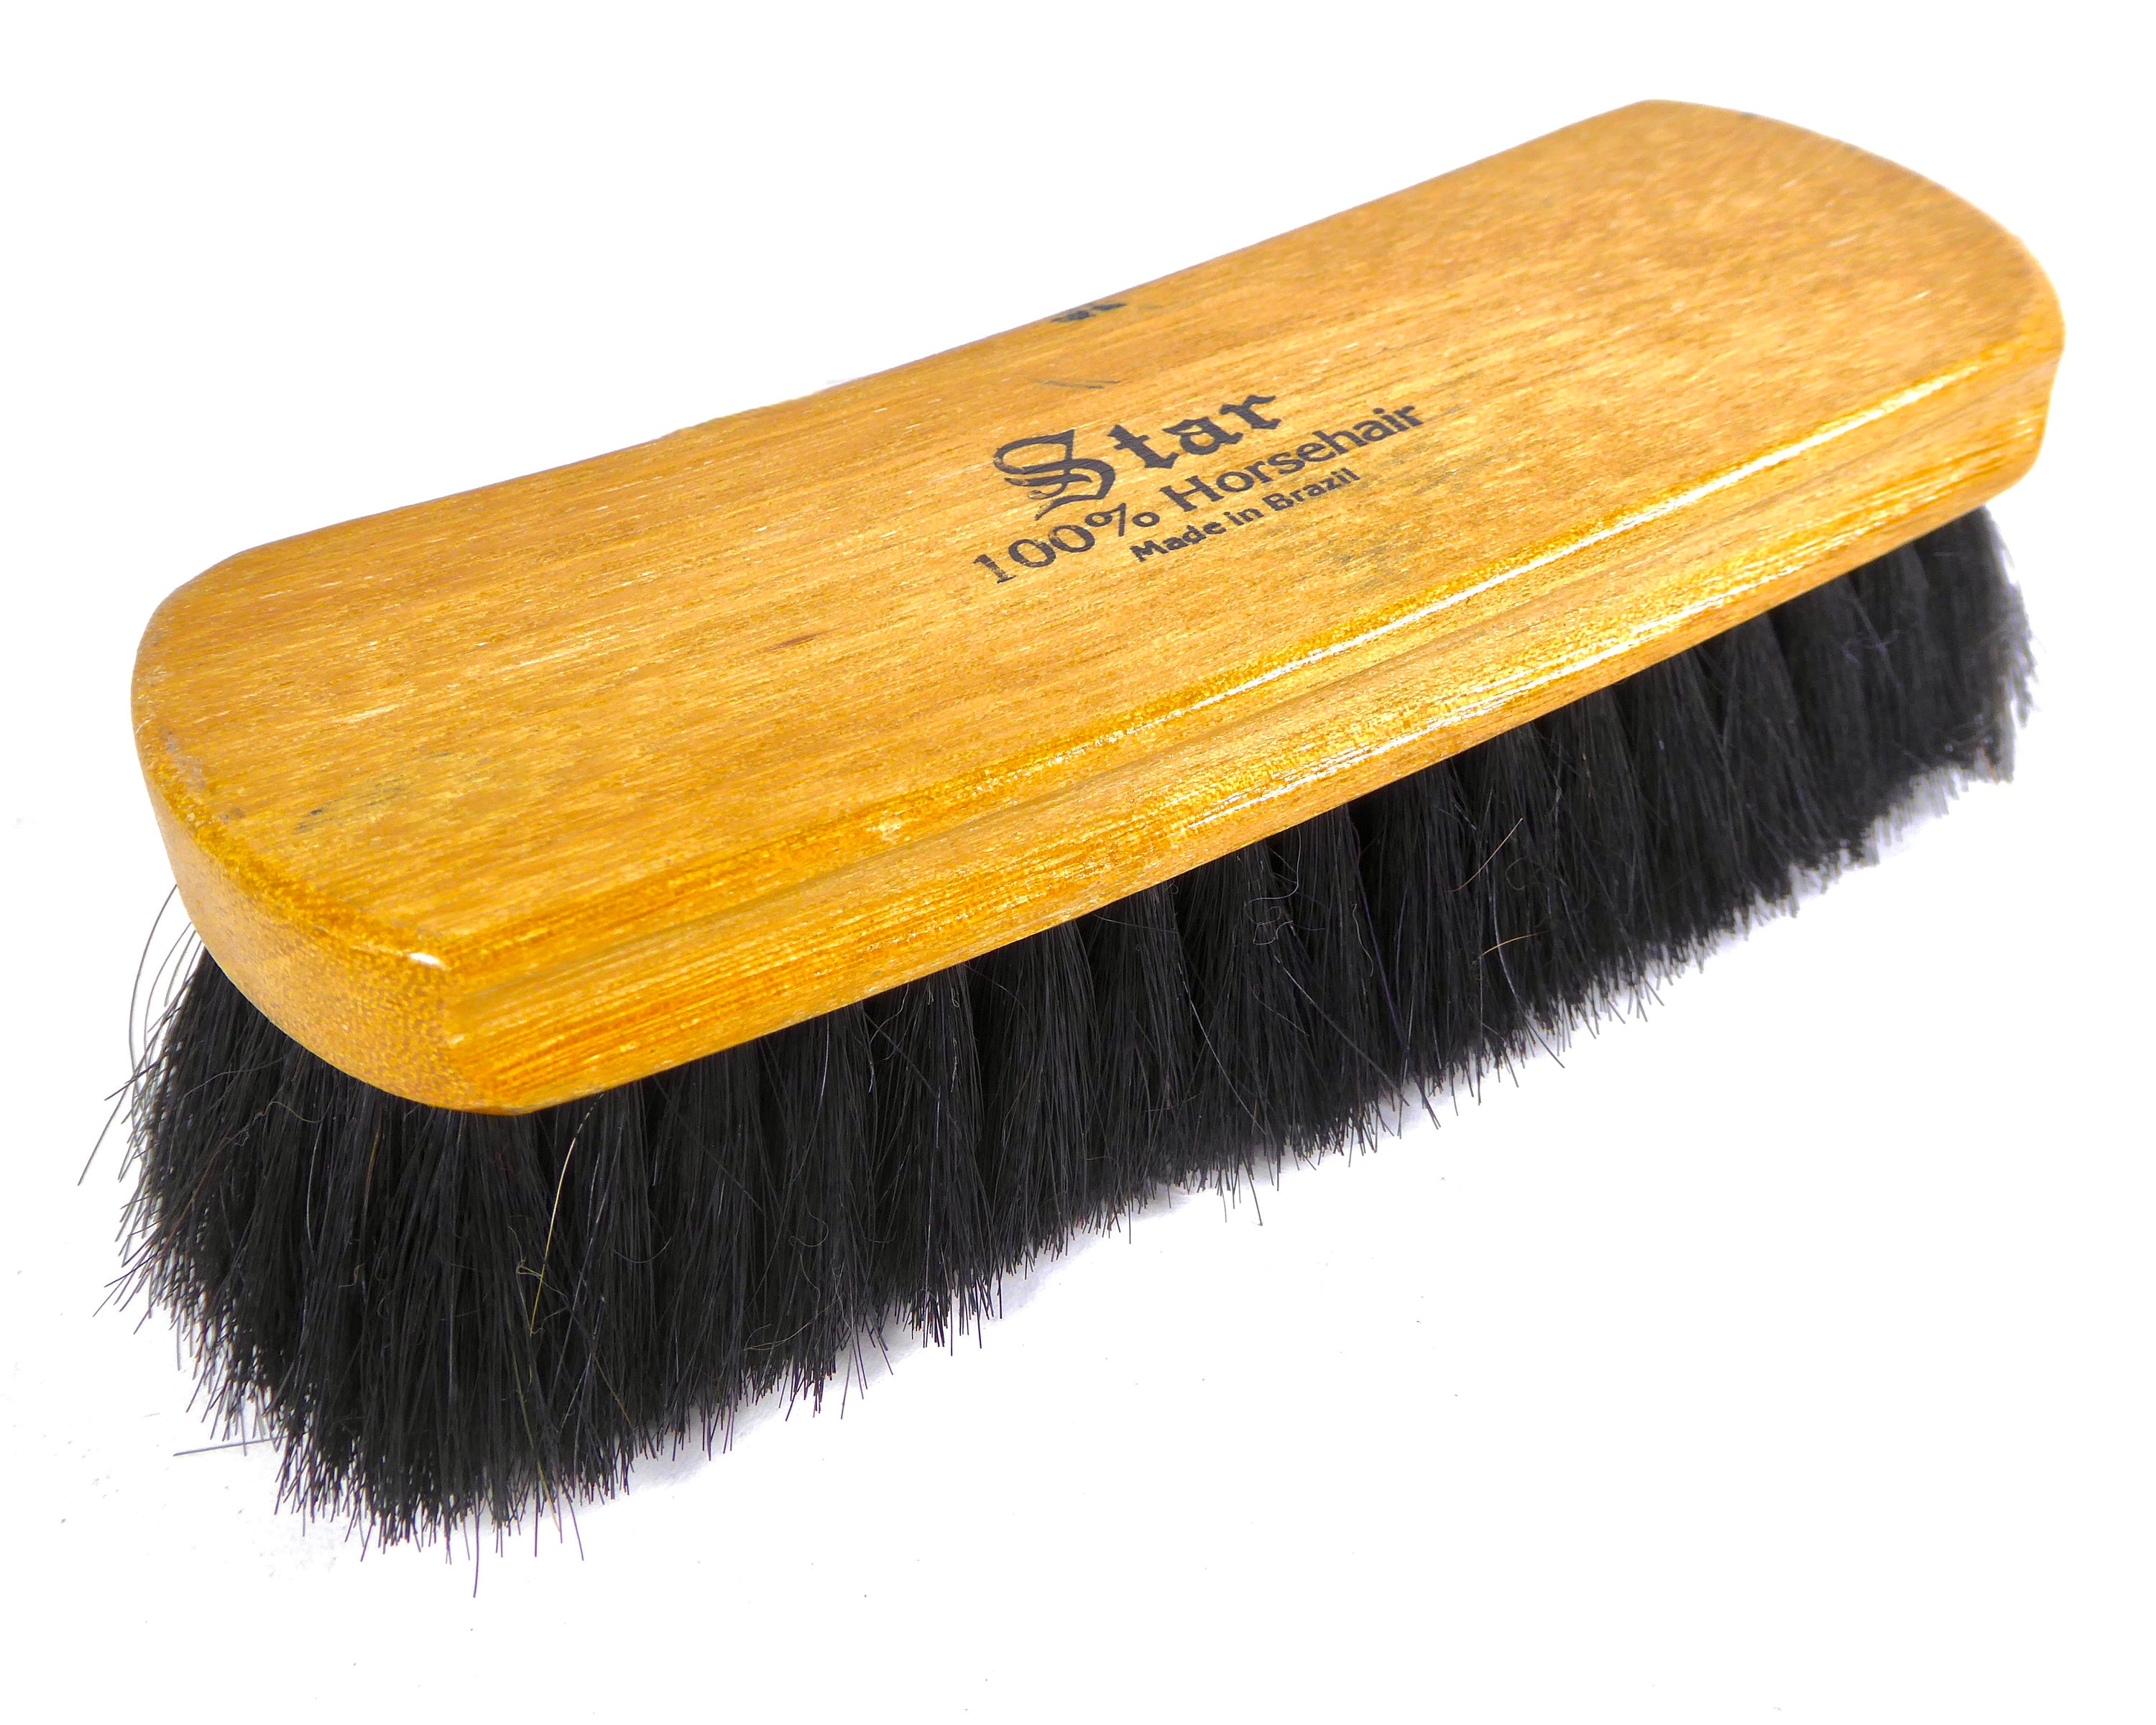 6.5 IN. Shoe Brush Boot Brush Leather Brush 100% Horsehair Shoe Polish Shoe  Shine Brush for Leather For Cleaning light Bristles 1 Pc.